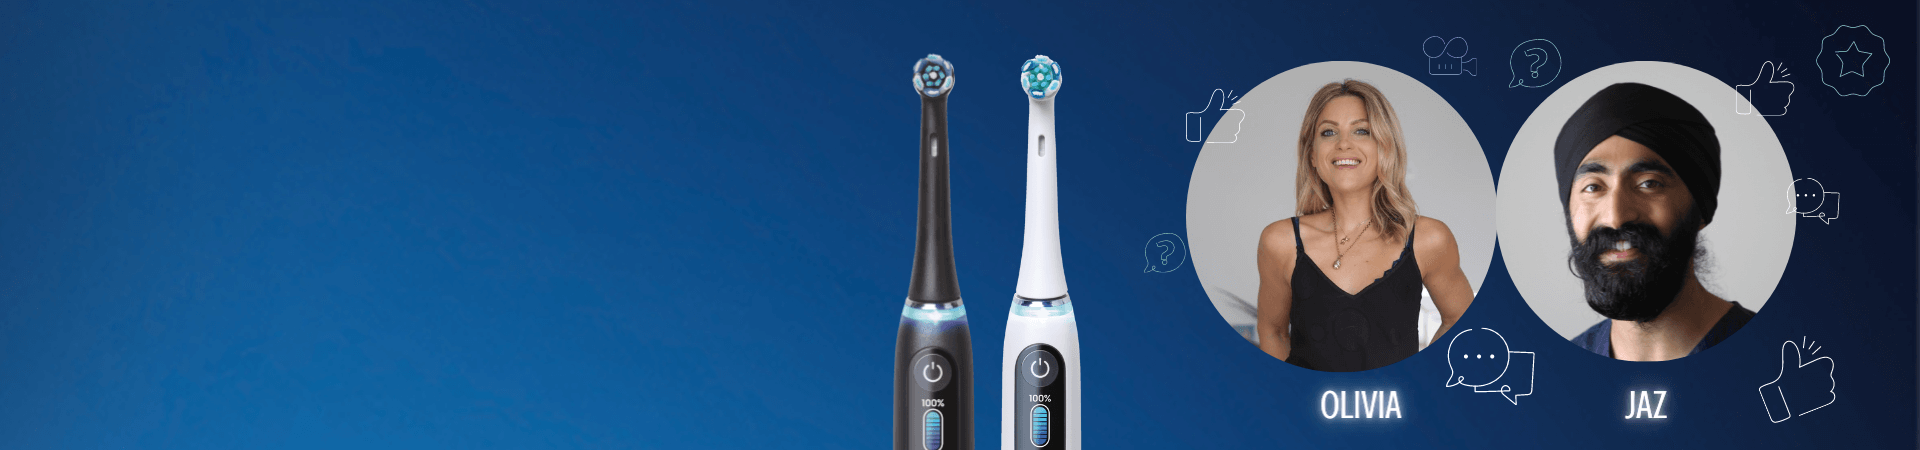 Learn more about Oral-B iO toothbrush & brush heads with exclusive offers hosted by Olivia Cox & Jaz Gulatı